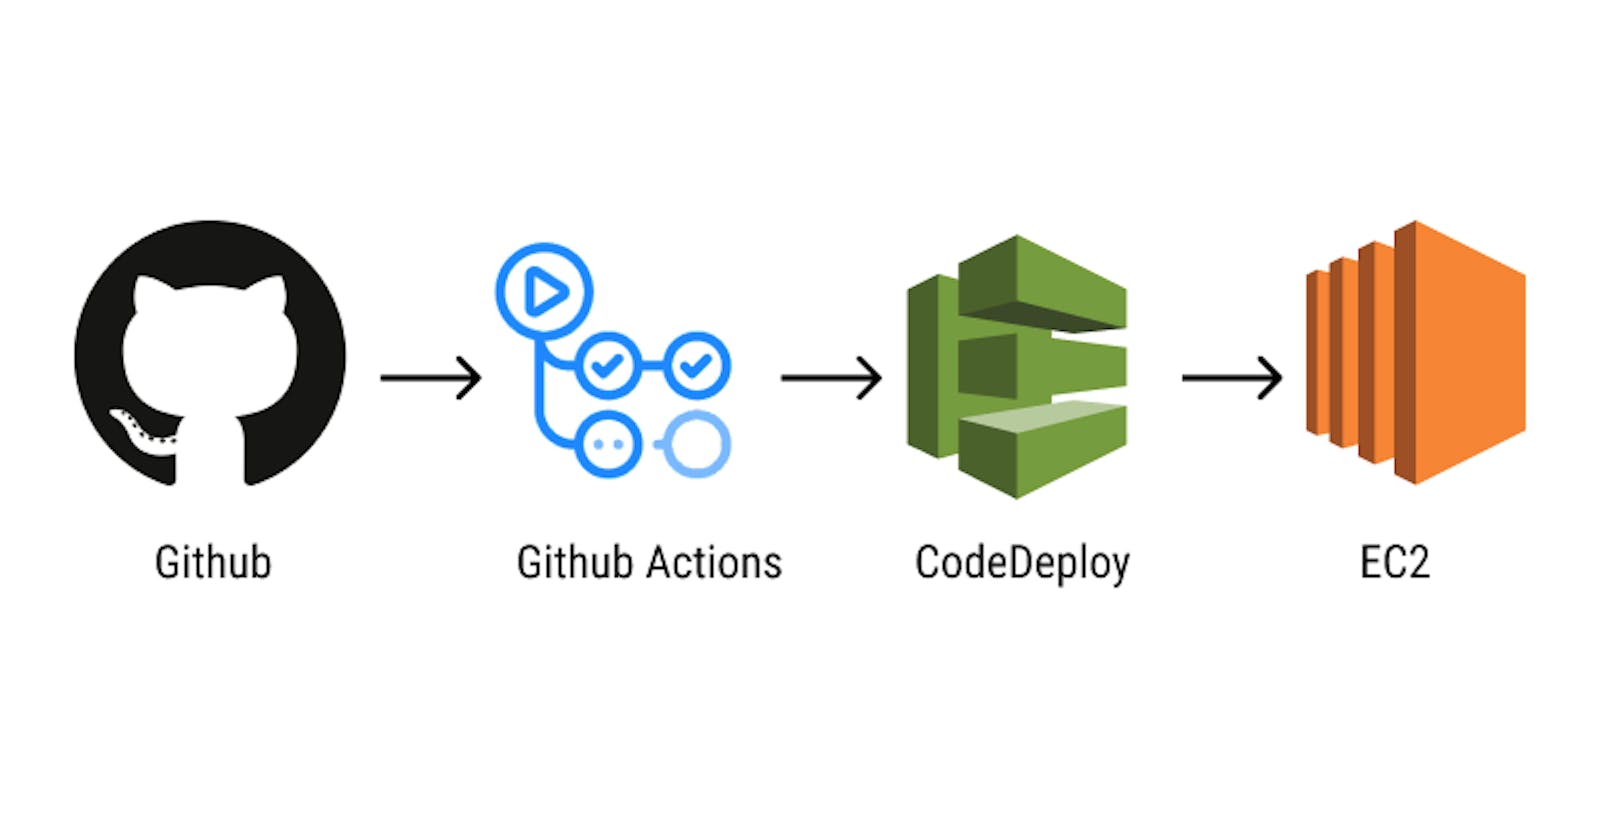 Using Github Actions to run automated tests and deployment to AWS EC2 with CodeDeploy.